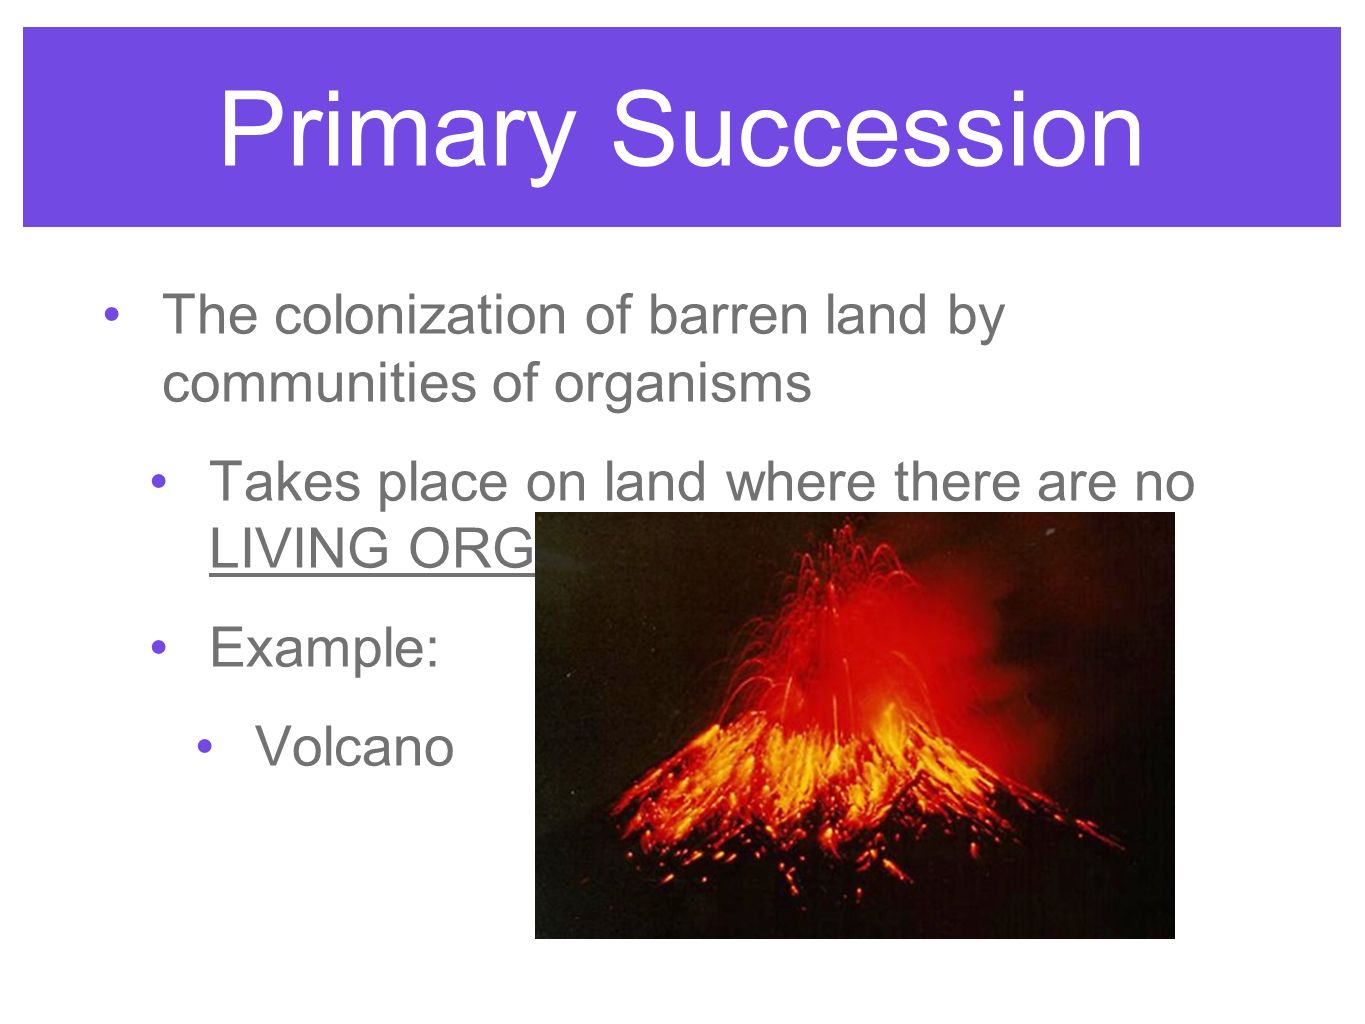 Primary Succession The colonization of barren land by communities of organisms. Takes place on land where there are no LIVING ORGANISMS.